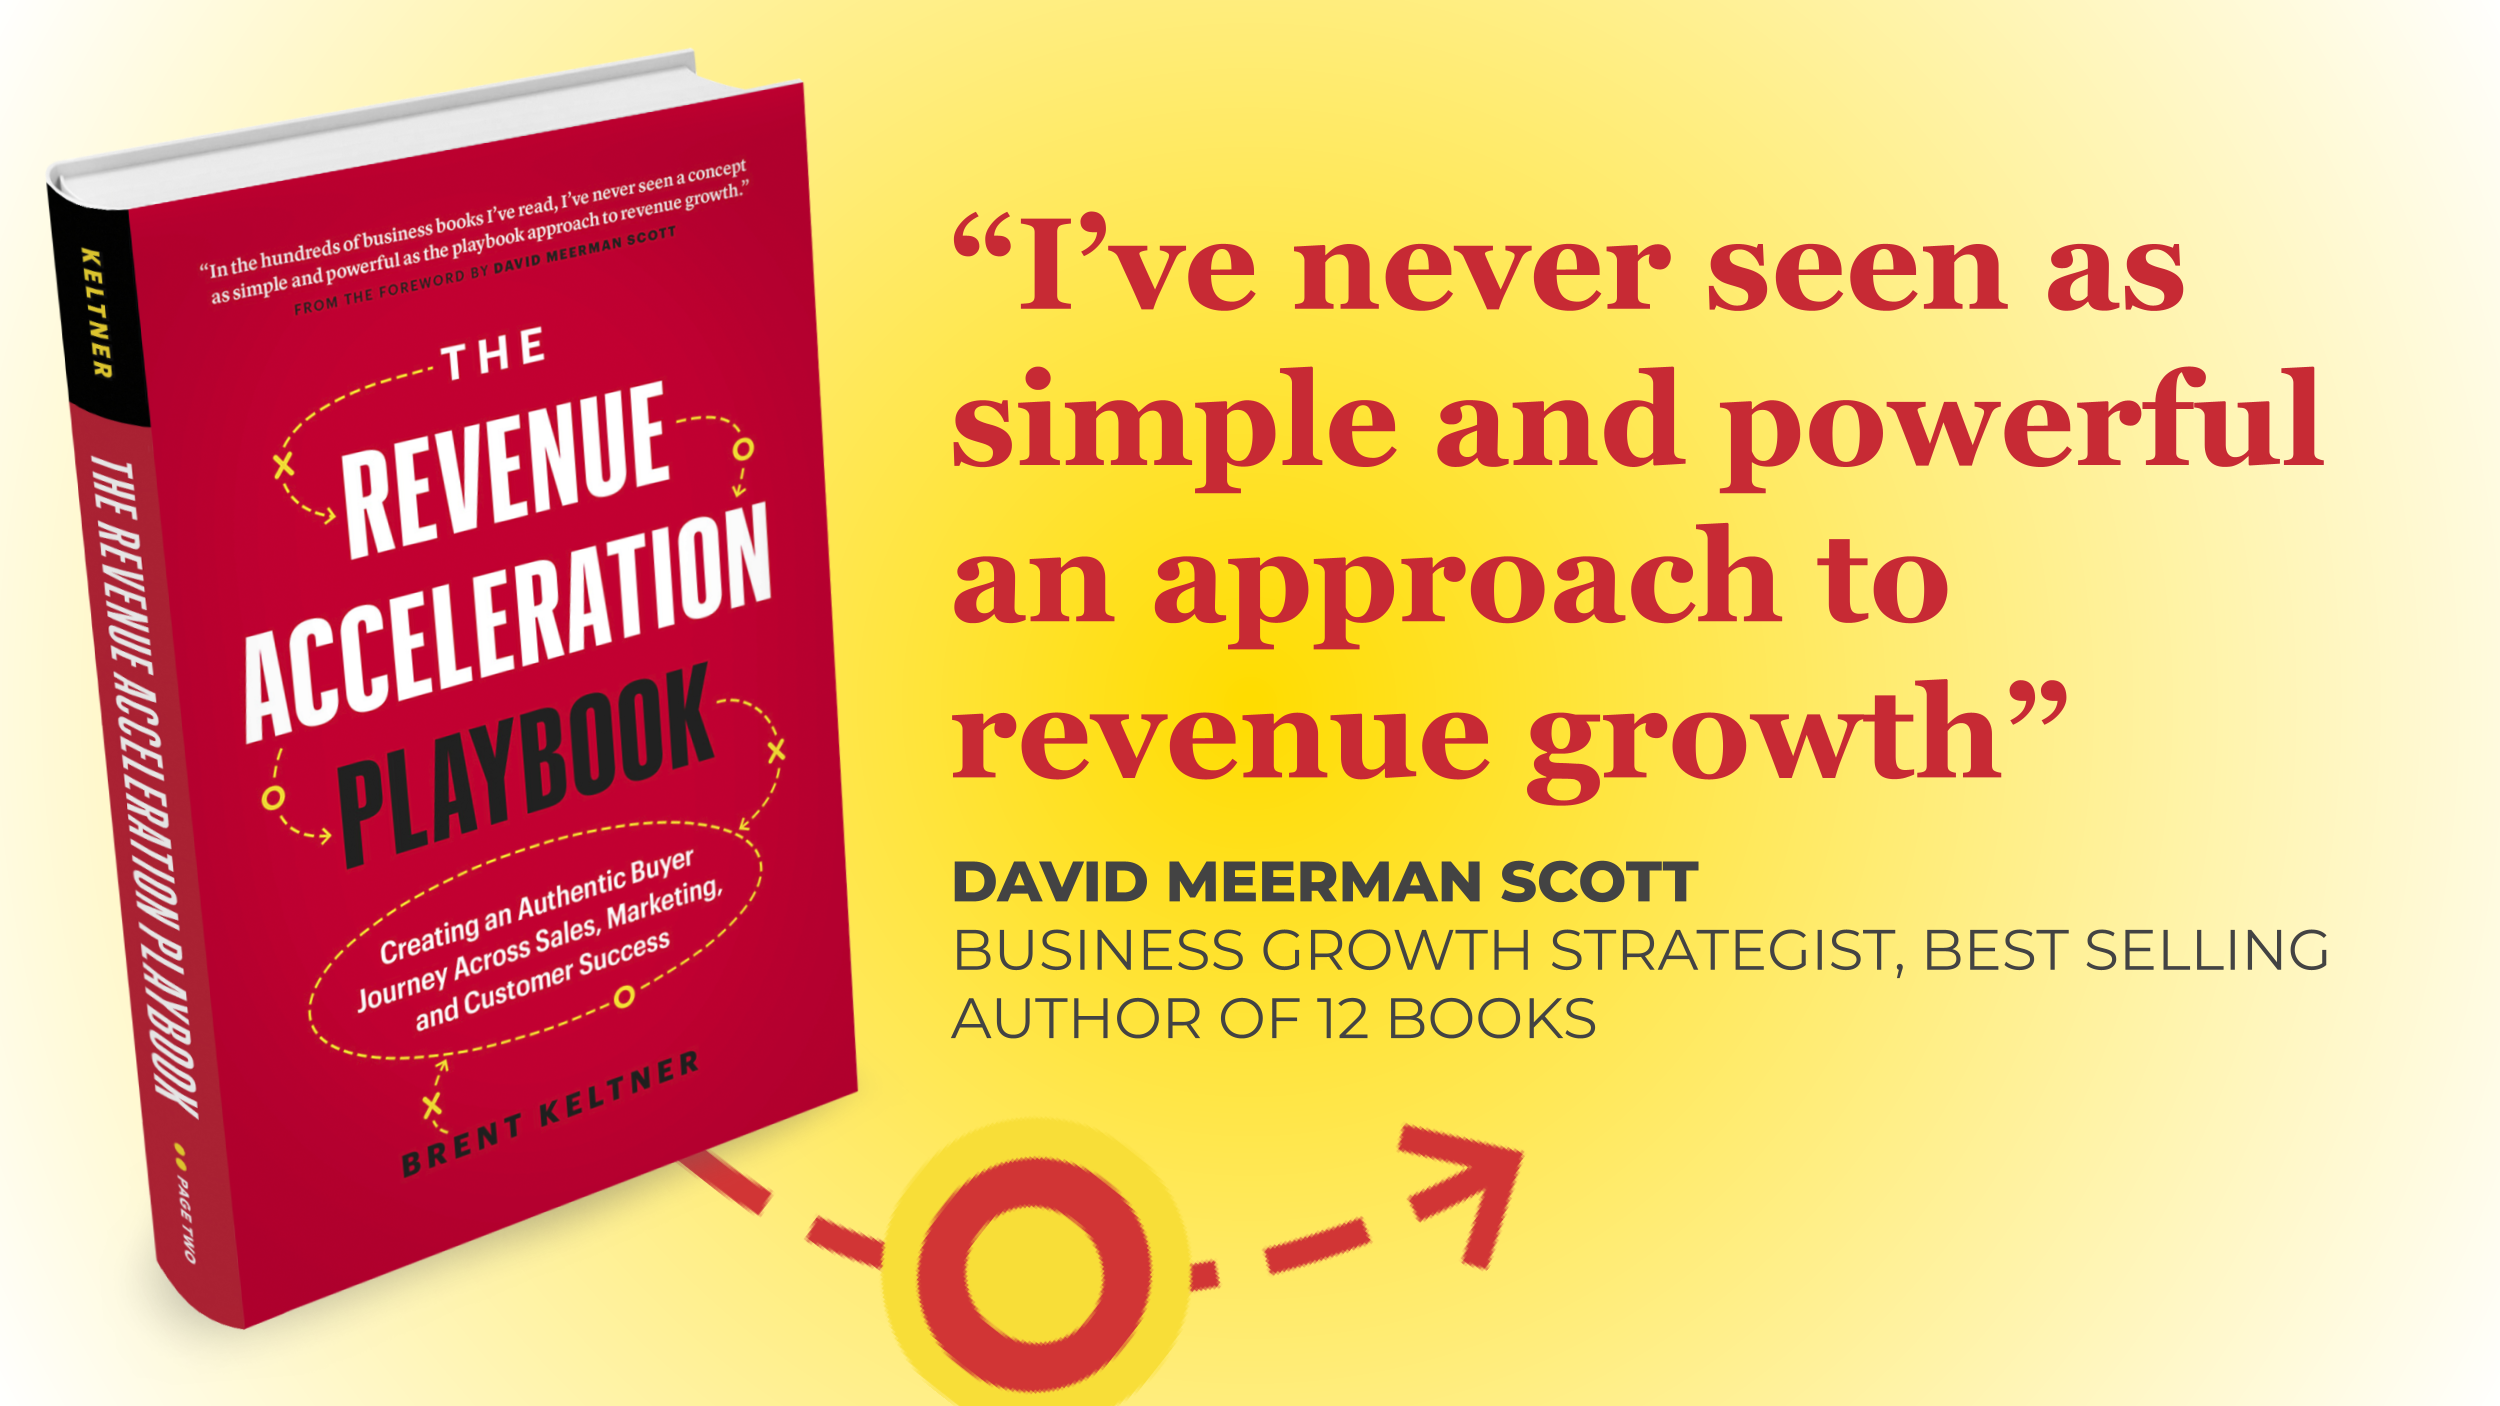 "I've never seen as simple and powerful an approach to revenue growth" - David Meerman Scott